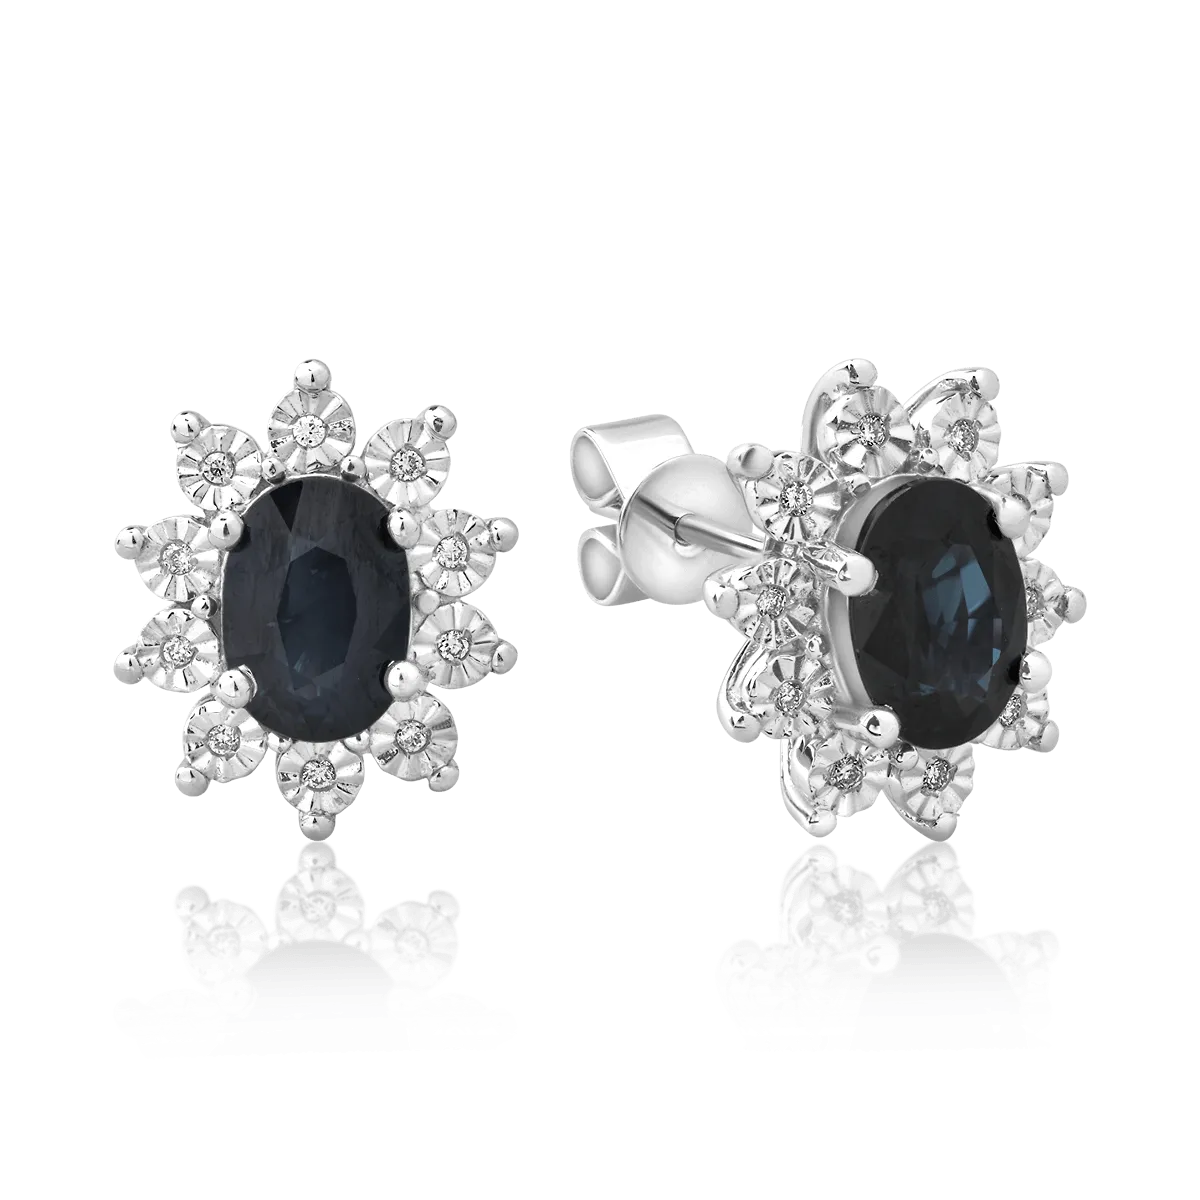 14K white gold earrings with 1.95ct sapphires and 0.05ct diamonds